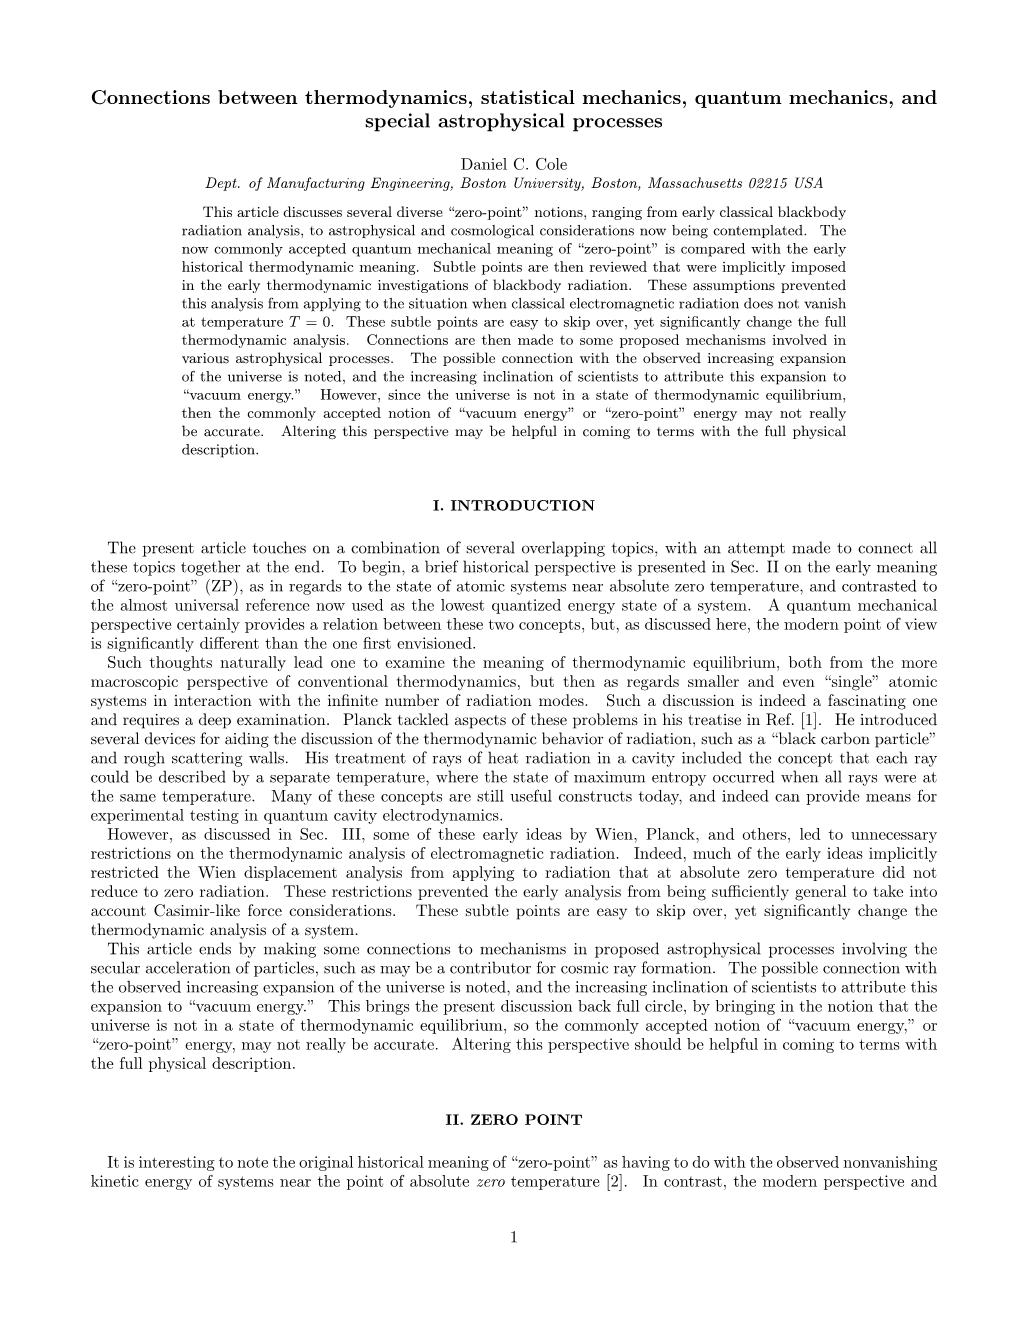 Connections Between Thermodynamics, Statistical Mechanics, Quantum Mechanics, and Special Astrophysical Processes